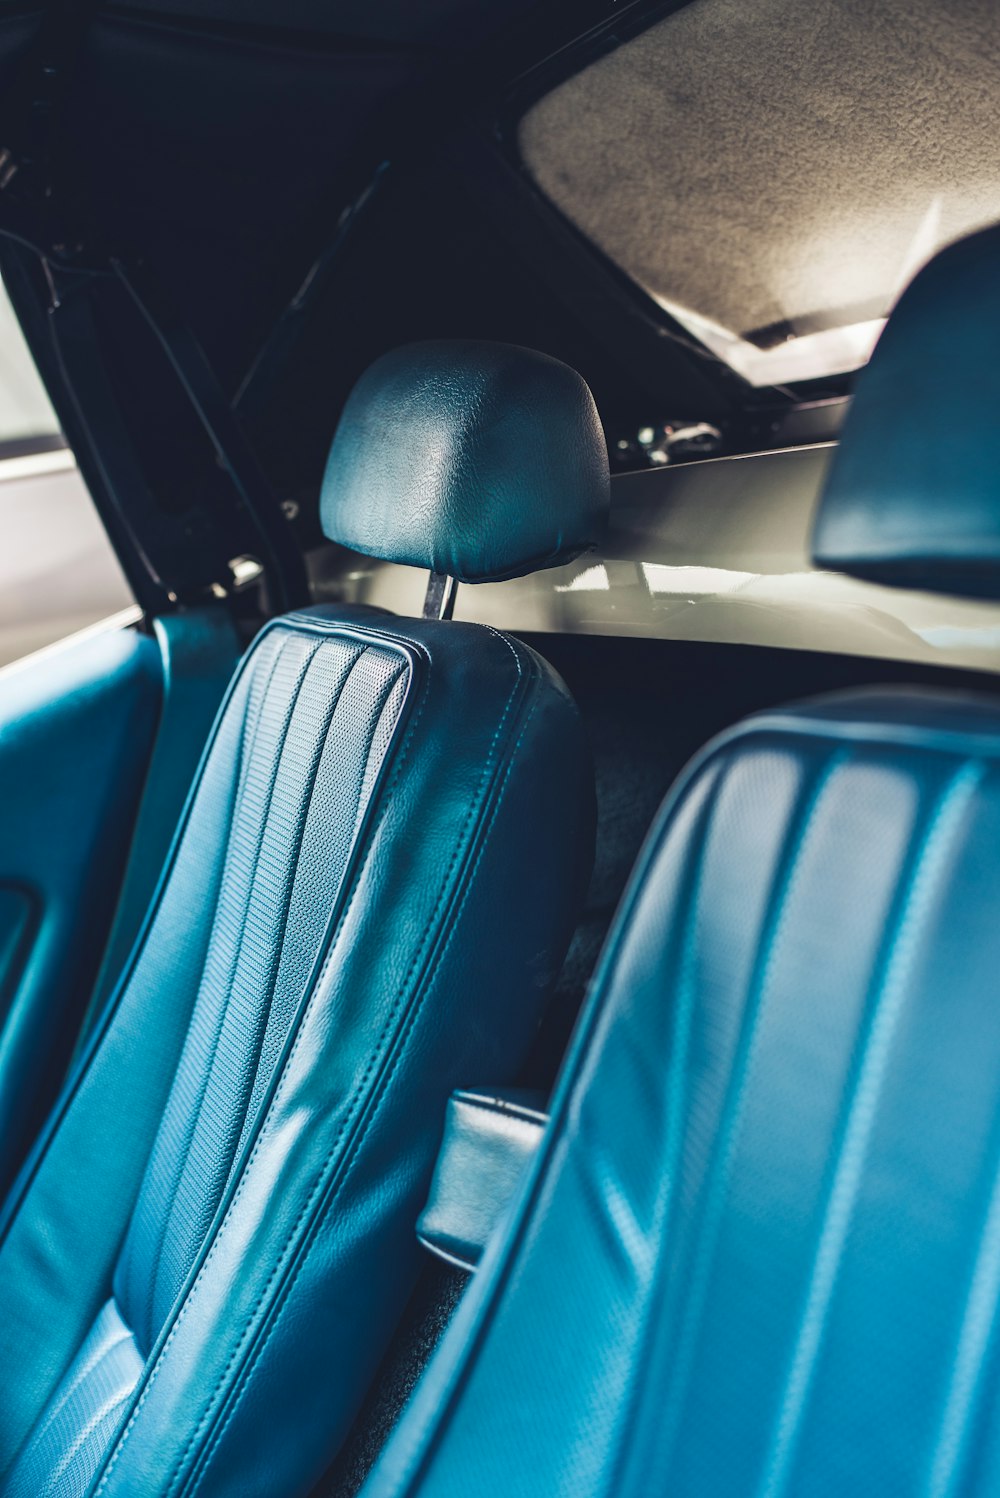 the interior of a car with blue leather seats